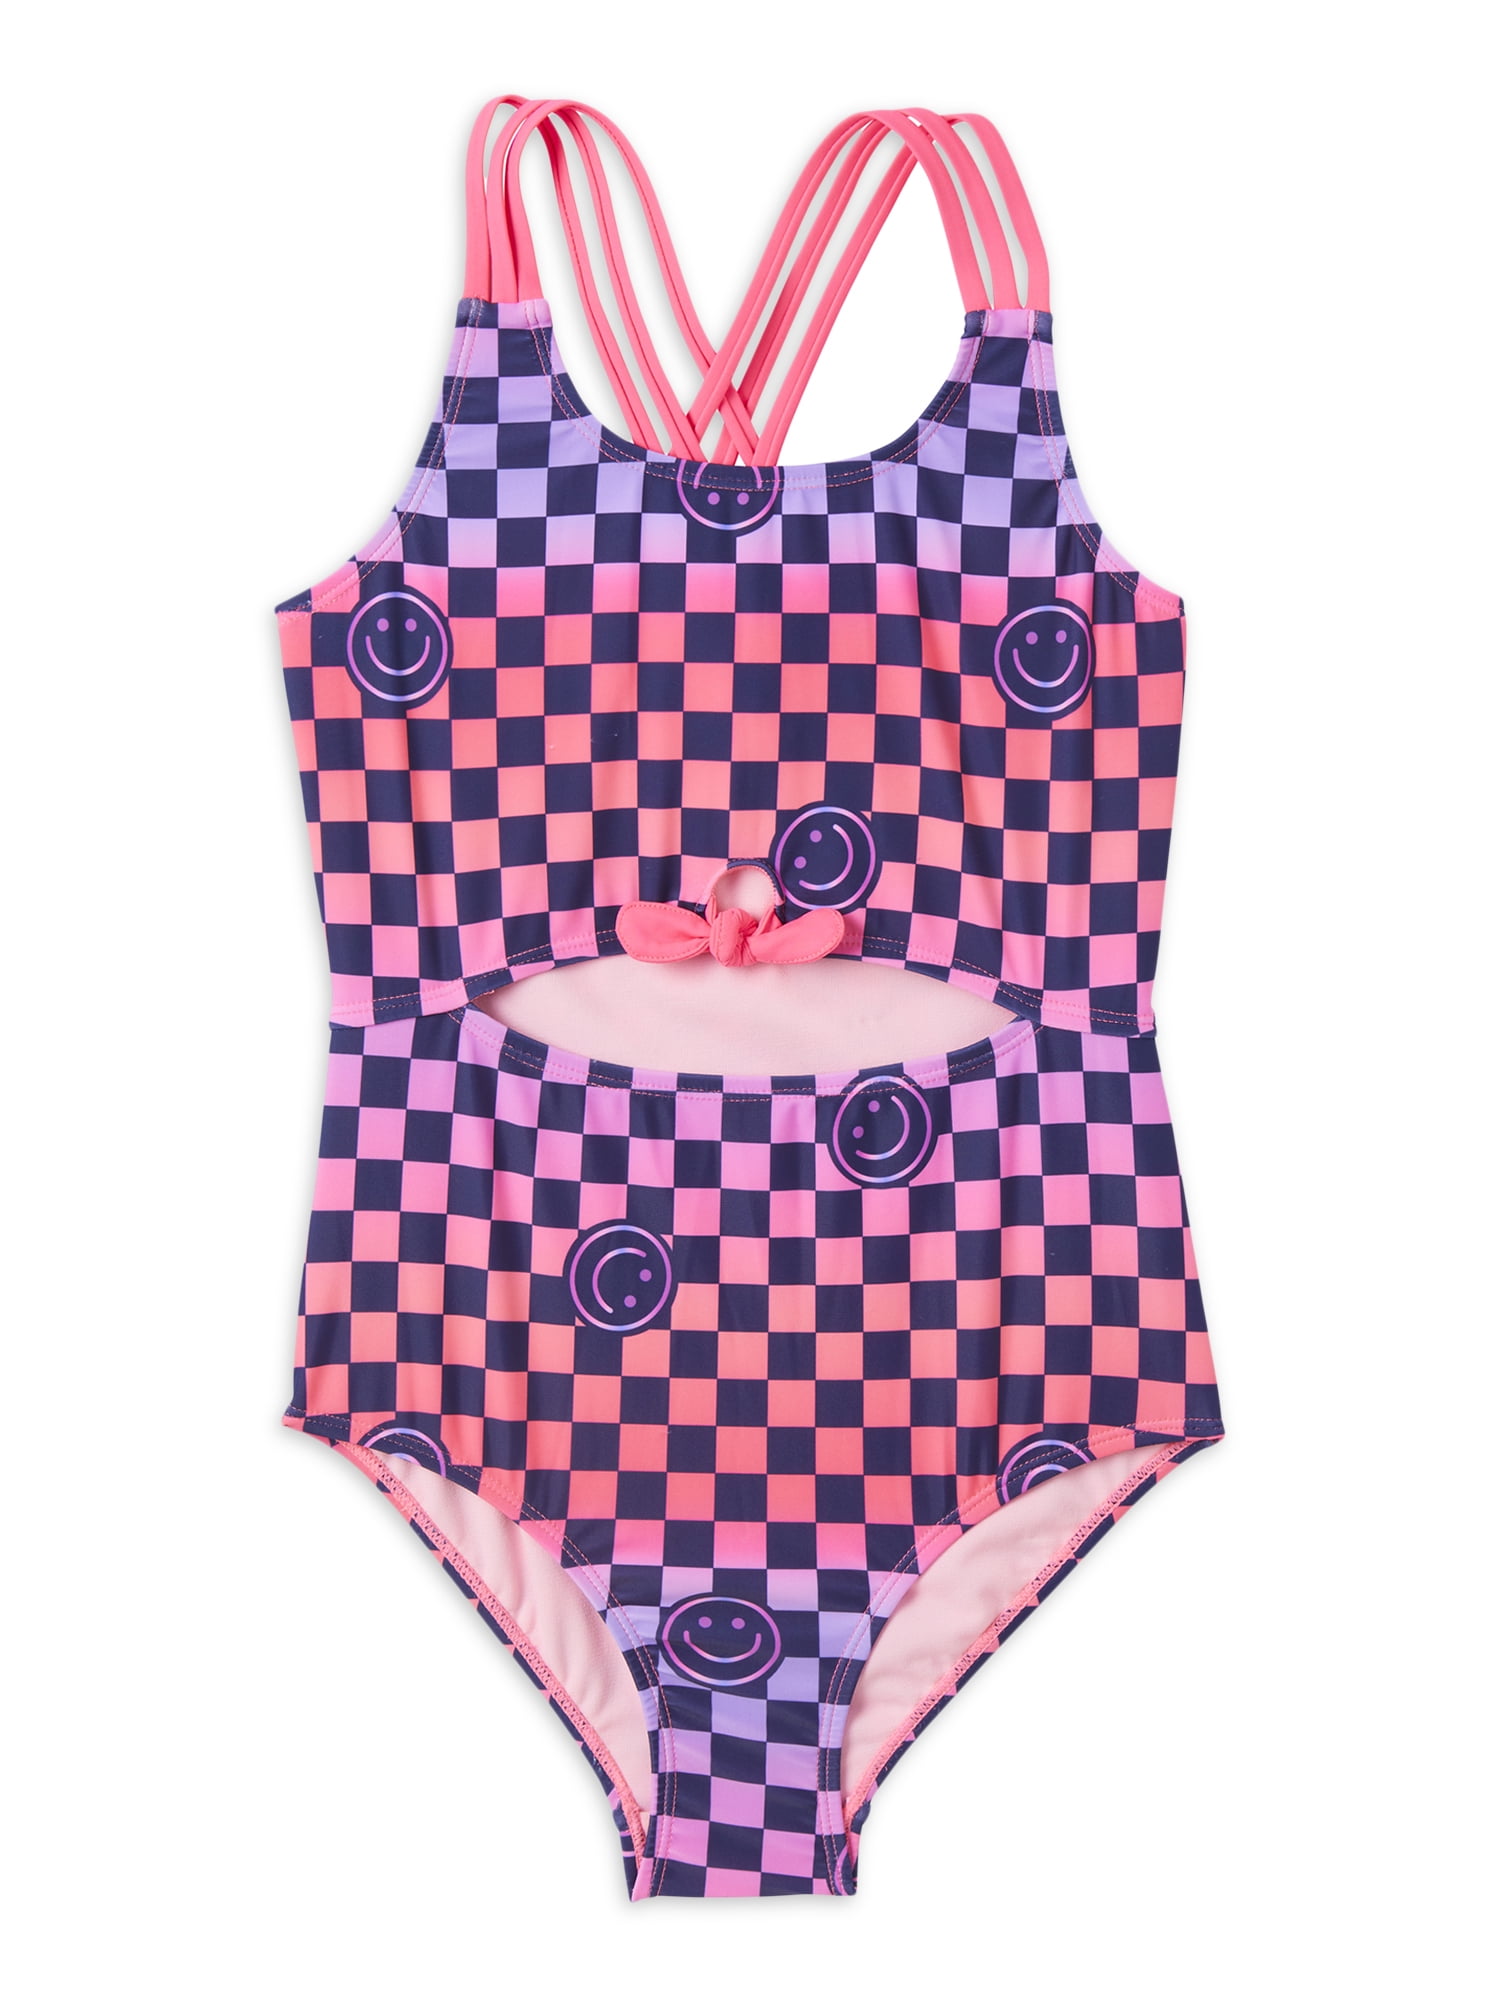 Smiley Cut Out One Piece Swimsuit - Calakids